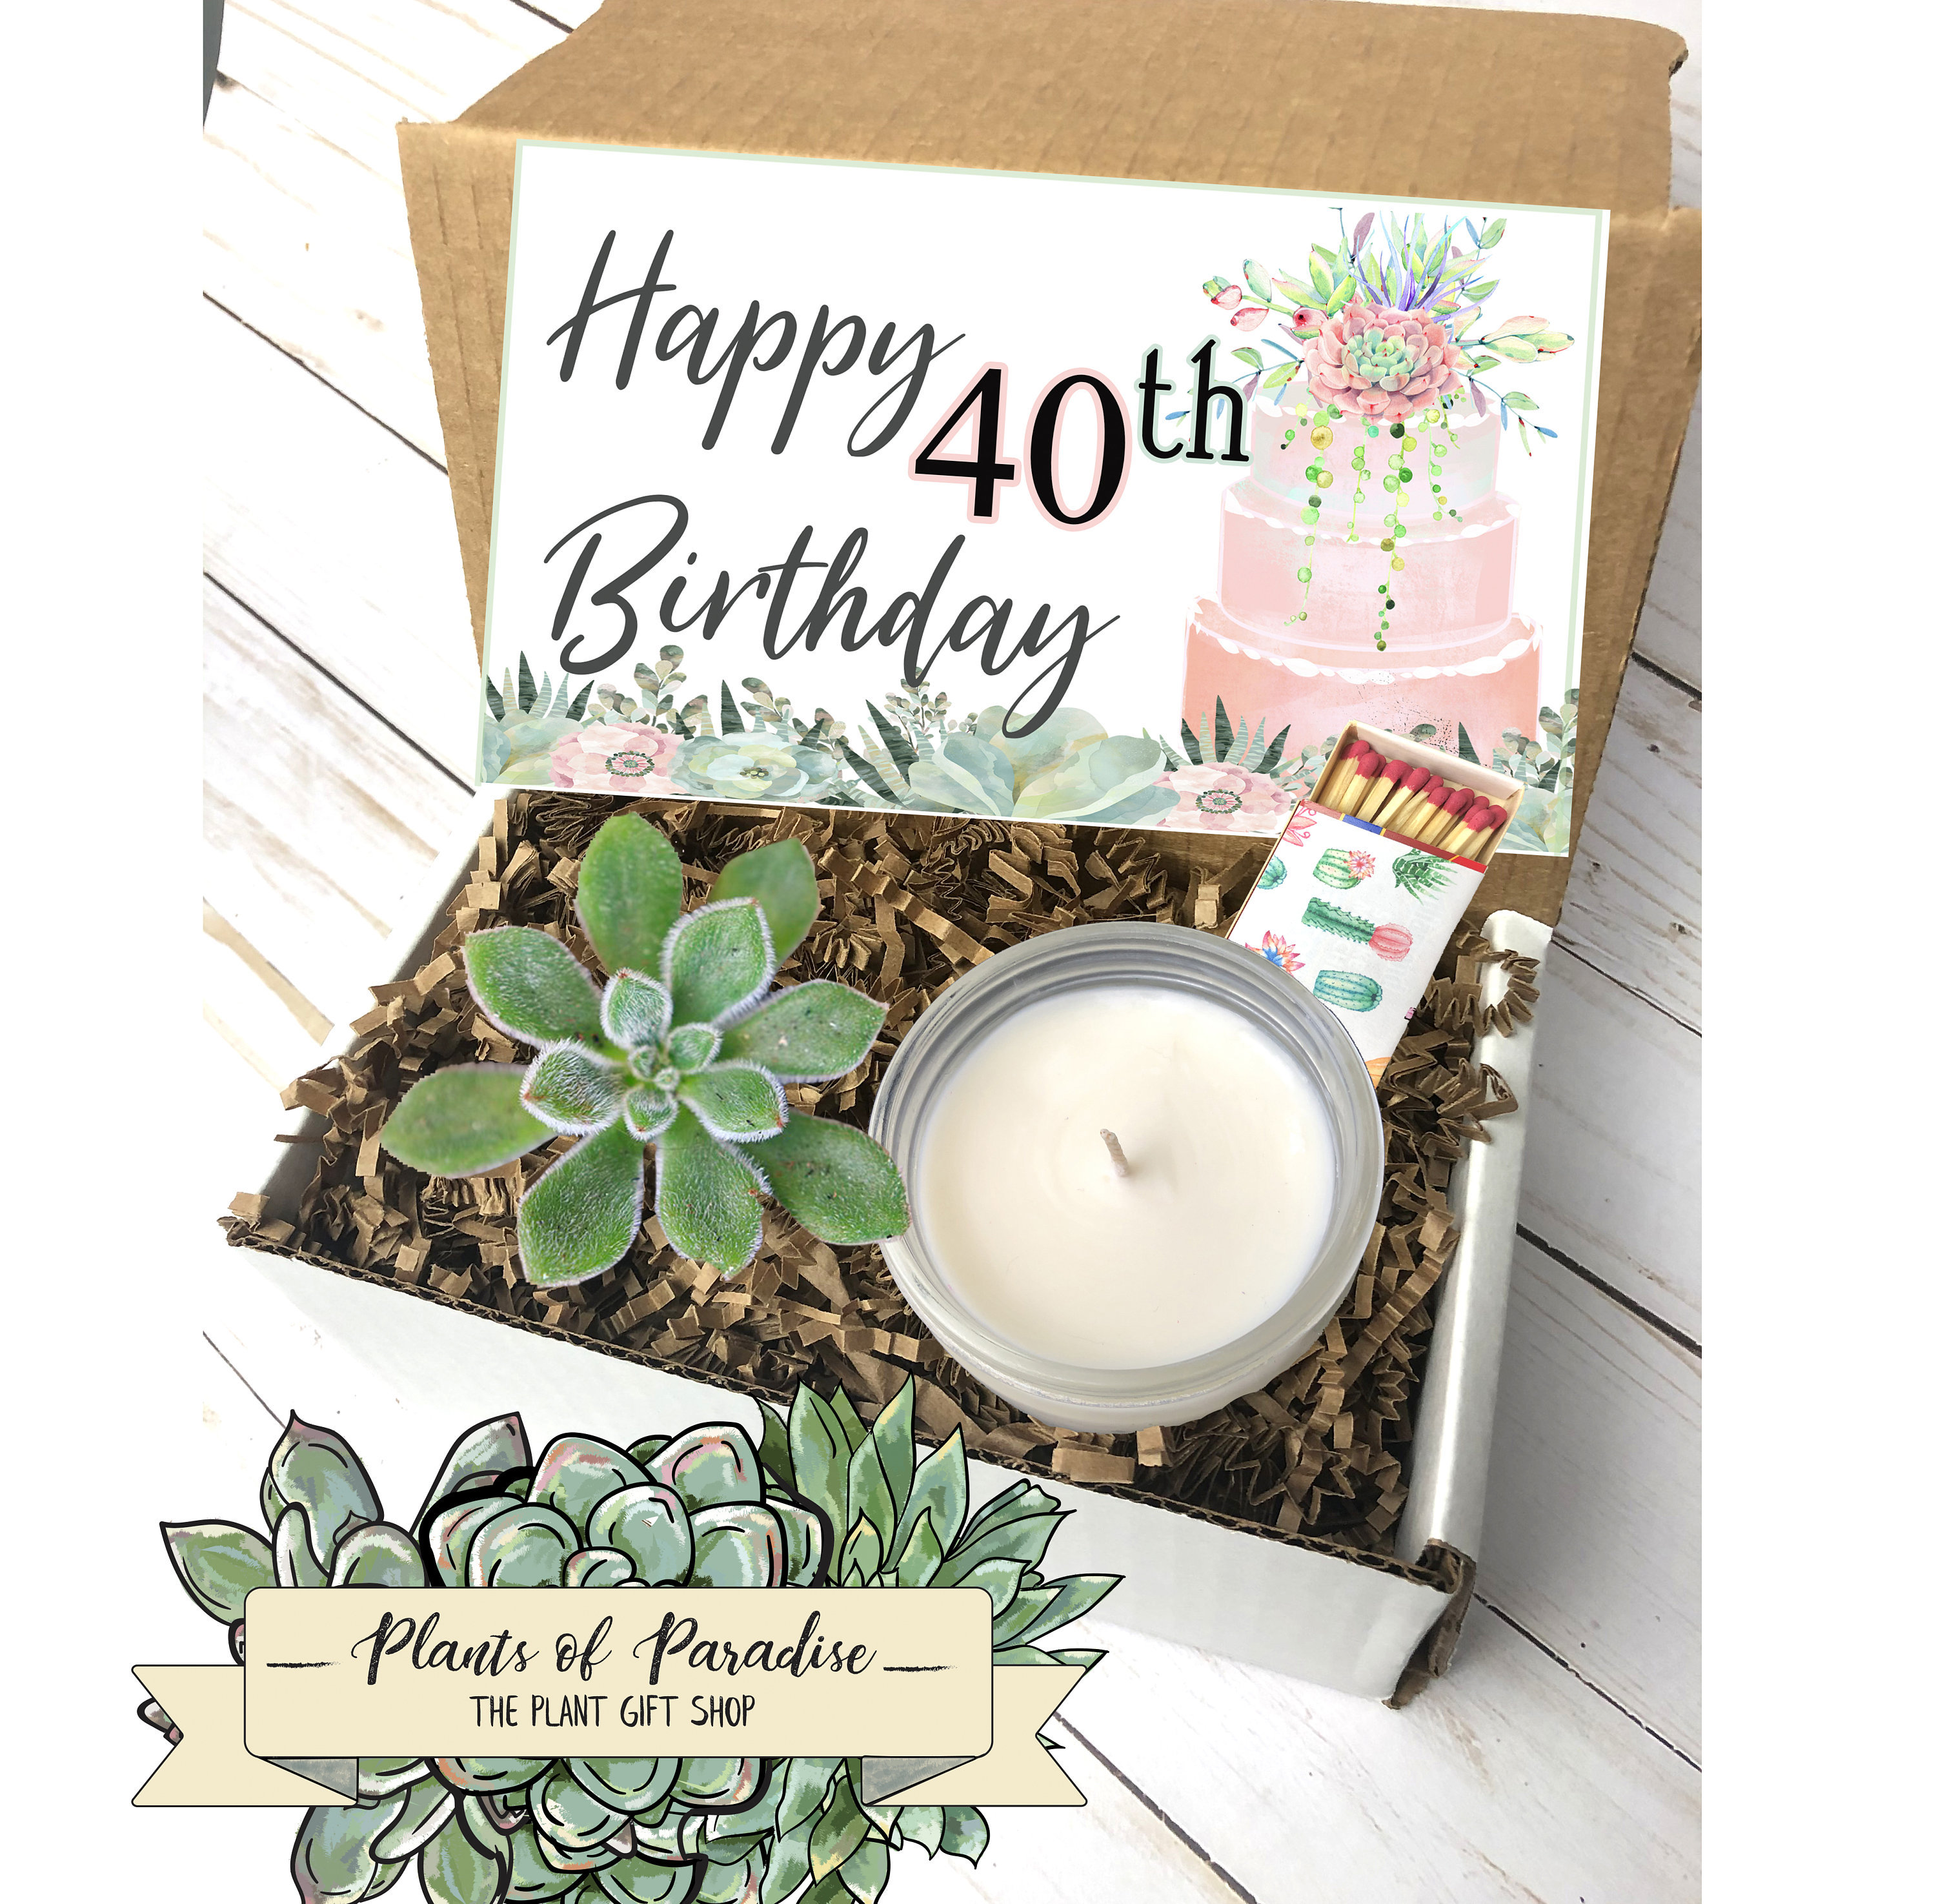 40 Birthday Gift 40 40 years 40th birthday gift for women birthday gift 40th birthday gift 40th gift 40th Birthday Candle